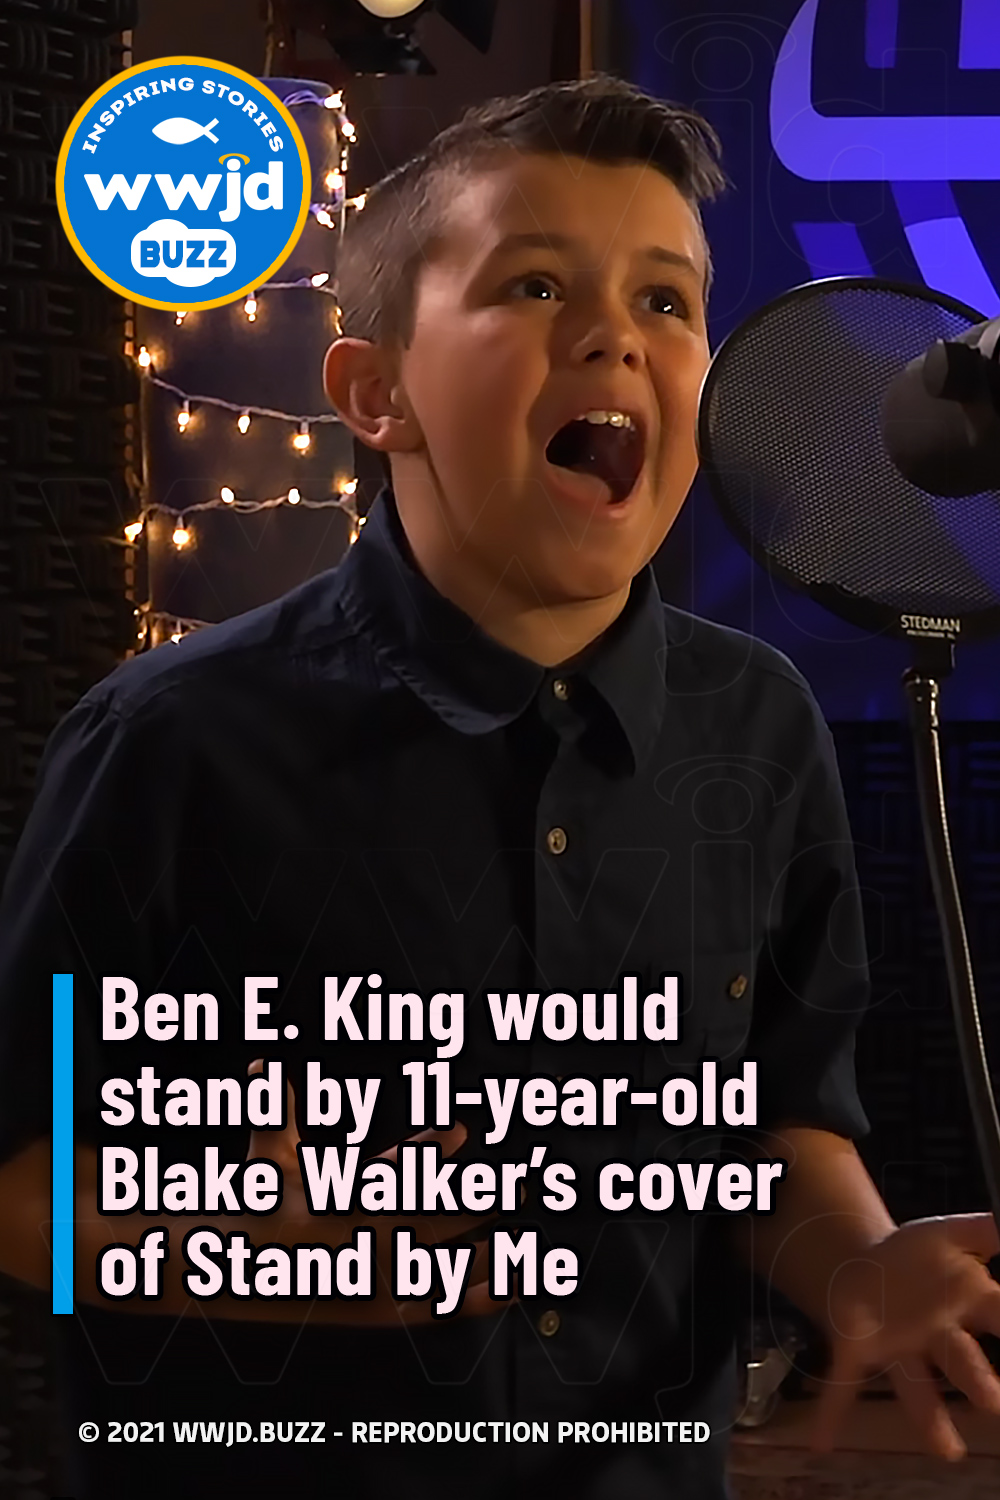 Ben E. King would stand by 11-year-old Blake Walker’s cover of Stand by Me